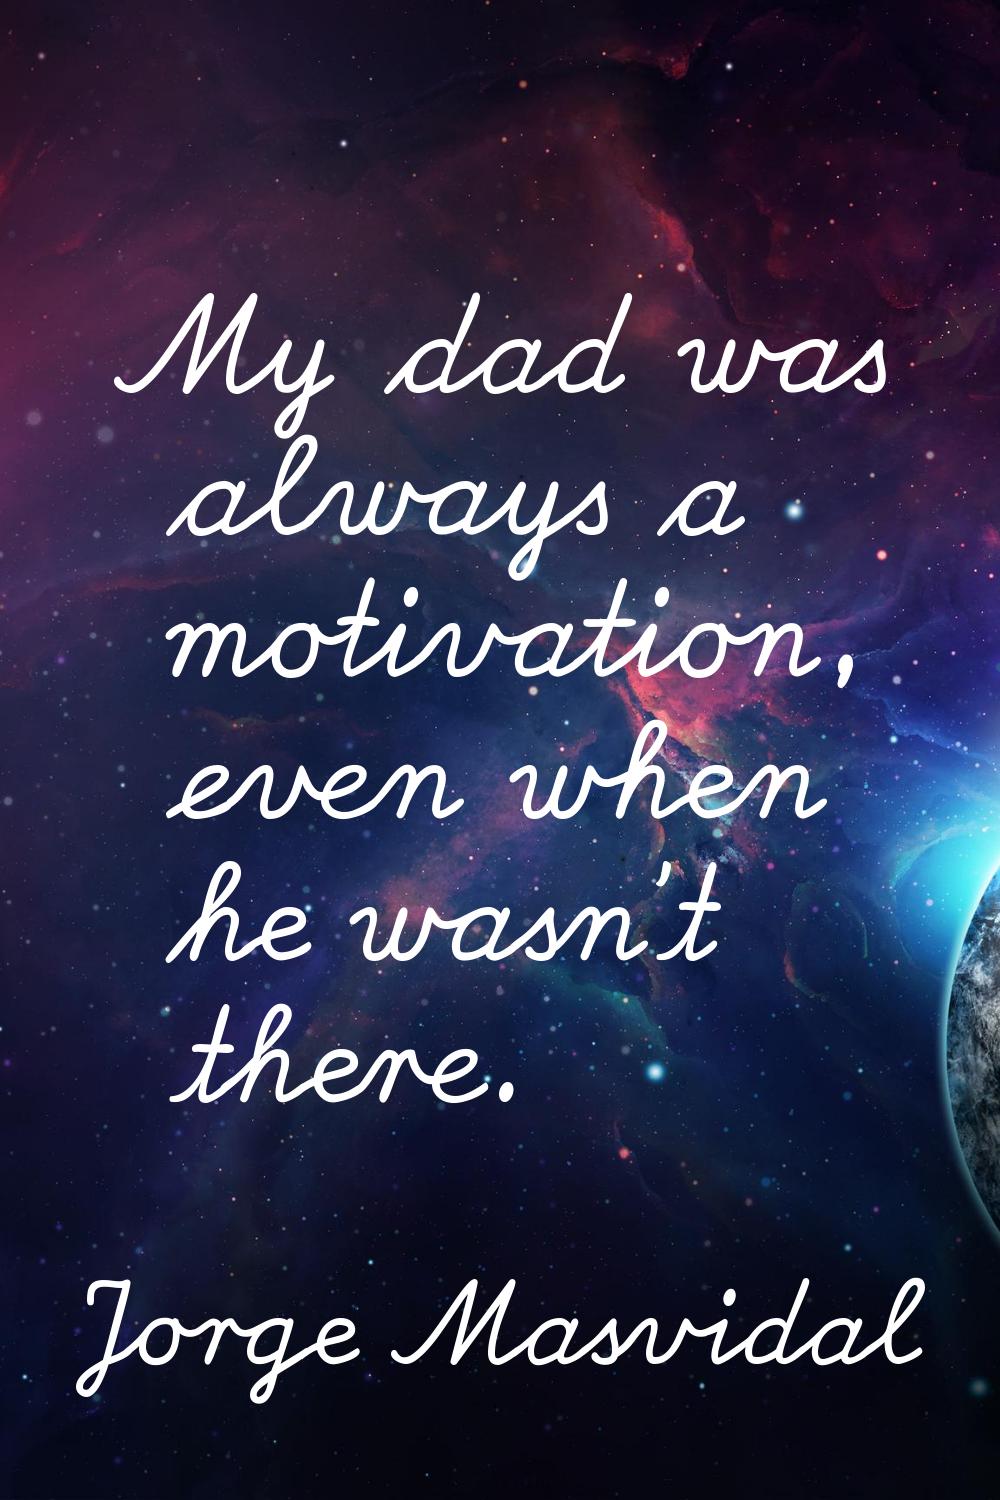 My dad was always a motivation, even when he wasn't there.